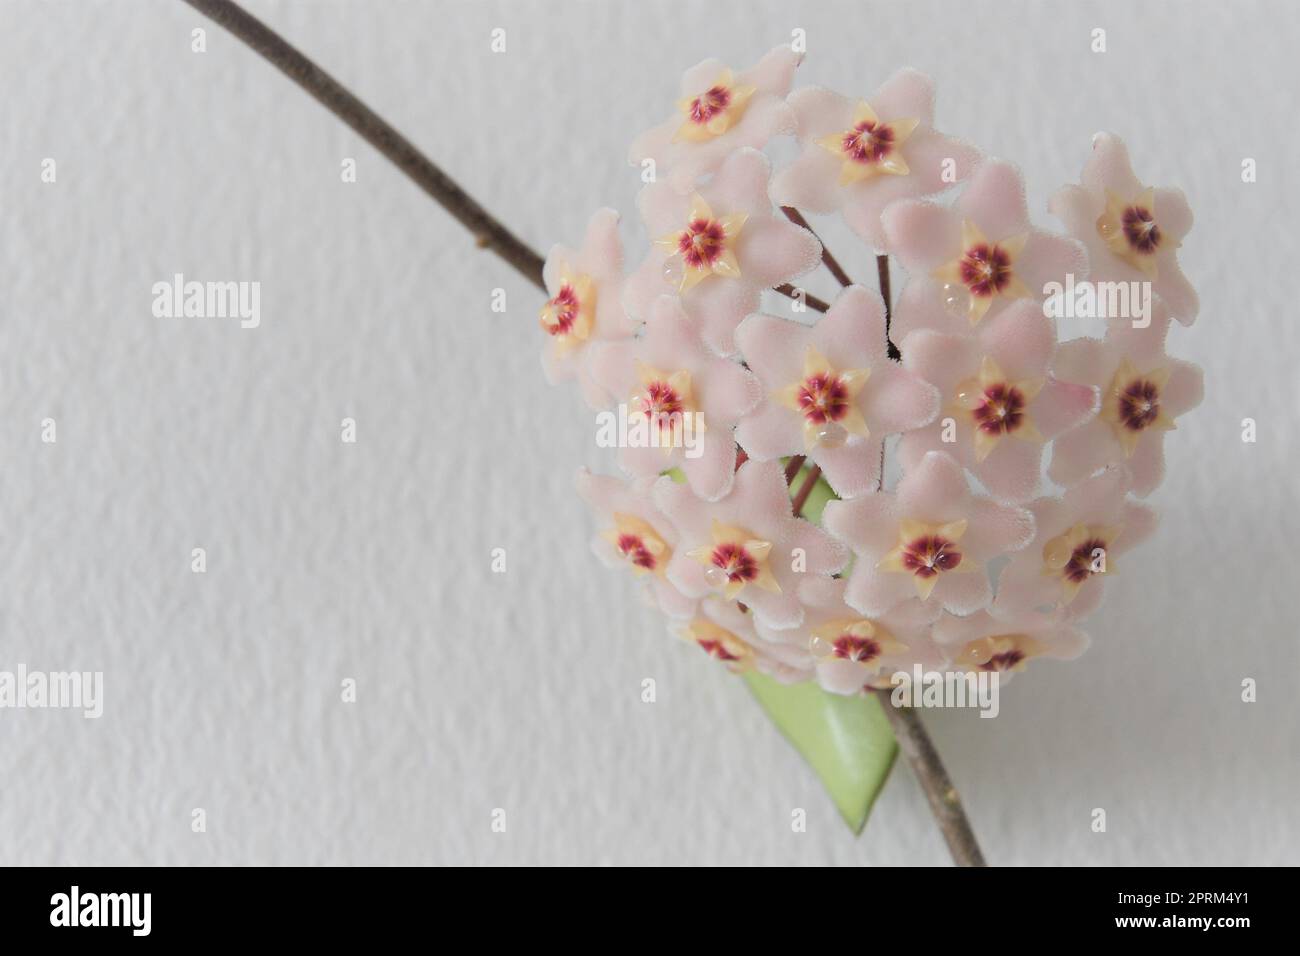 Hoya carnosa flower on vine. The blooms are light pink and star shaped, and nectar drips from the corolla. Isolated on a white background. Stock Photo